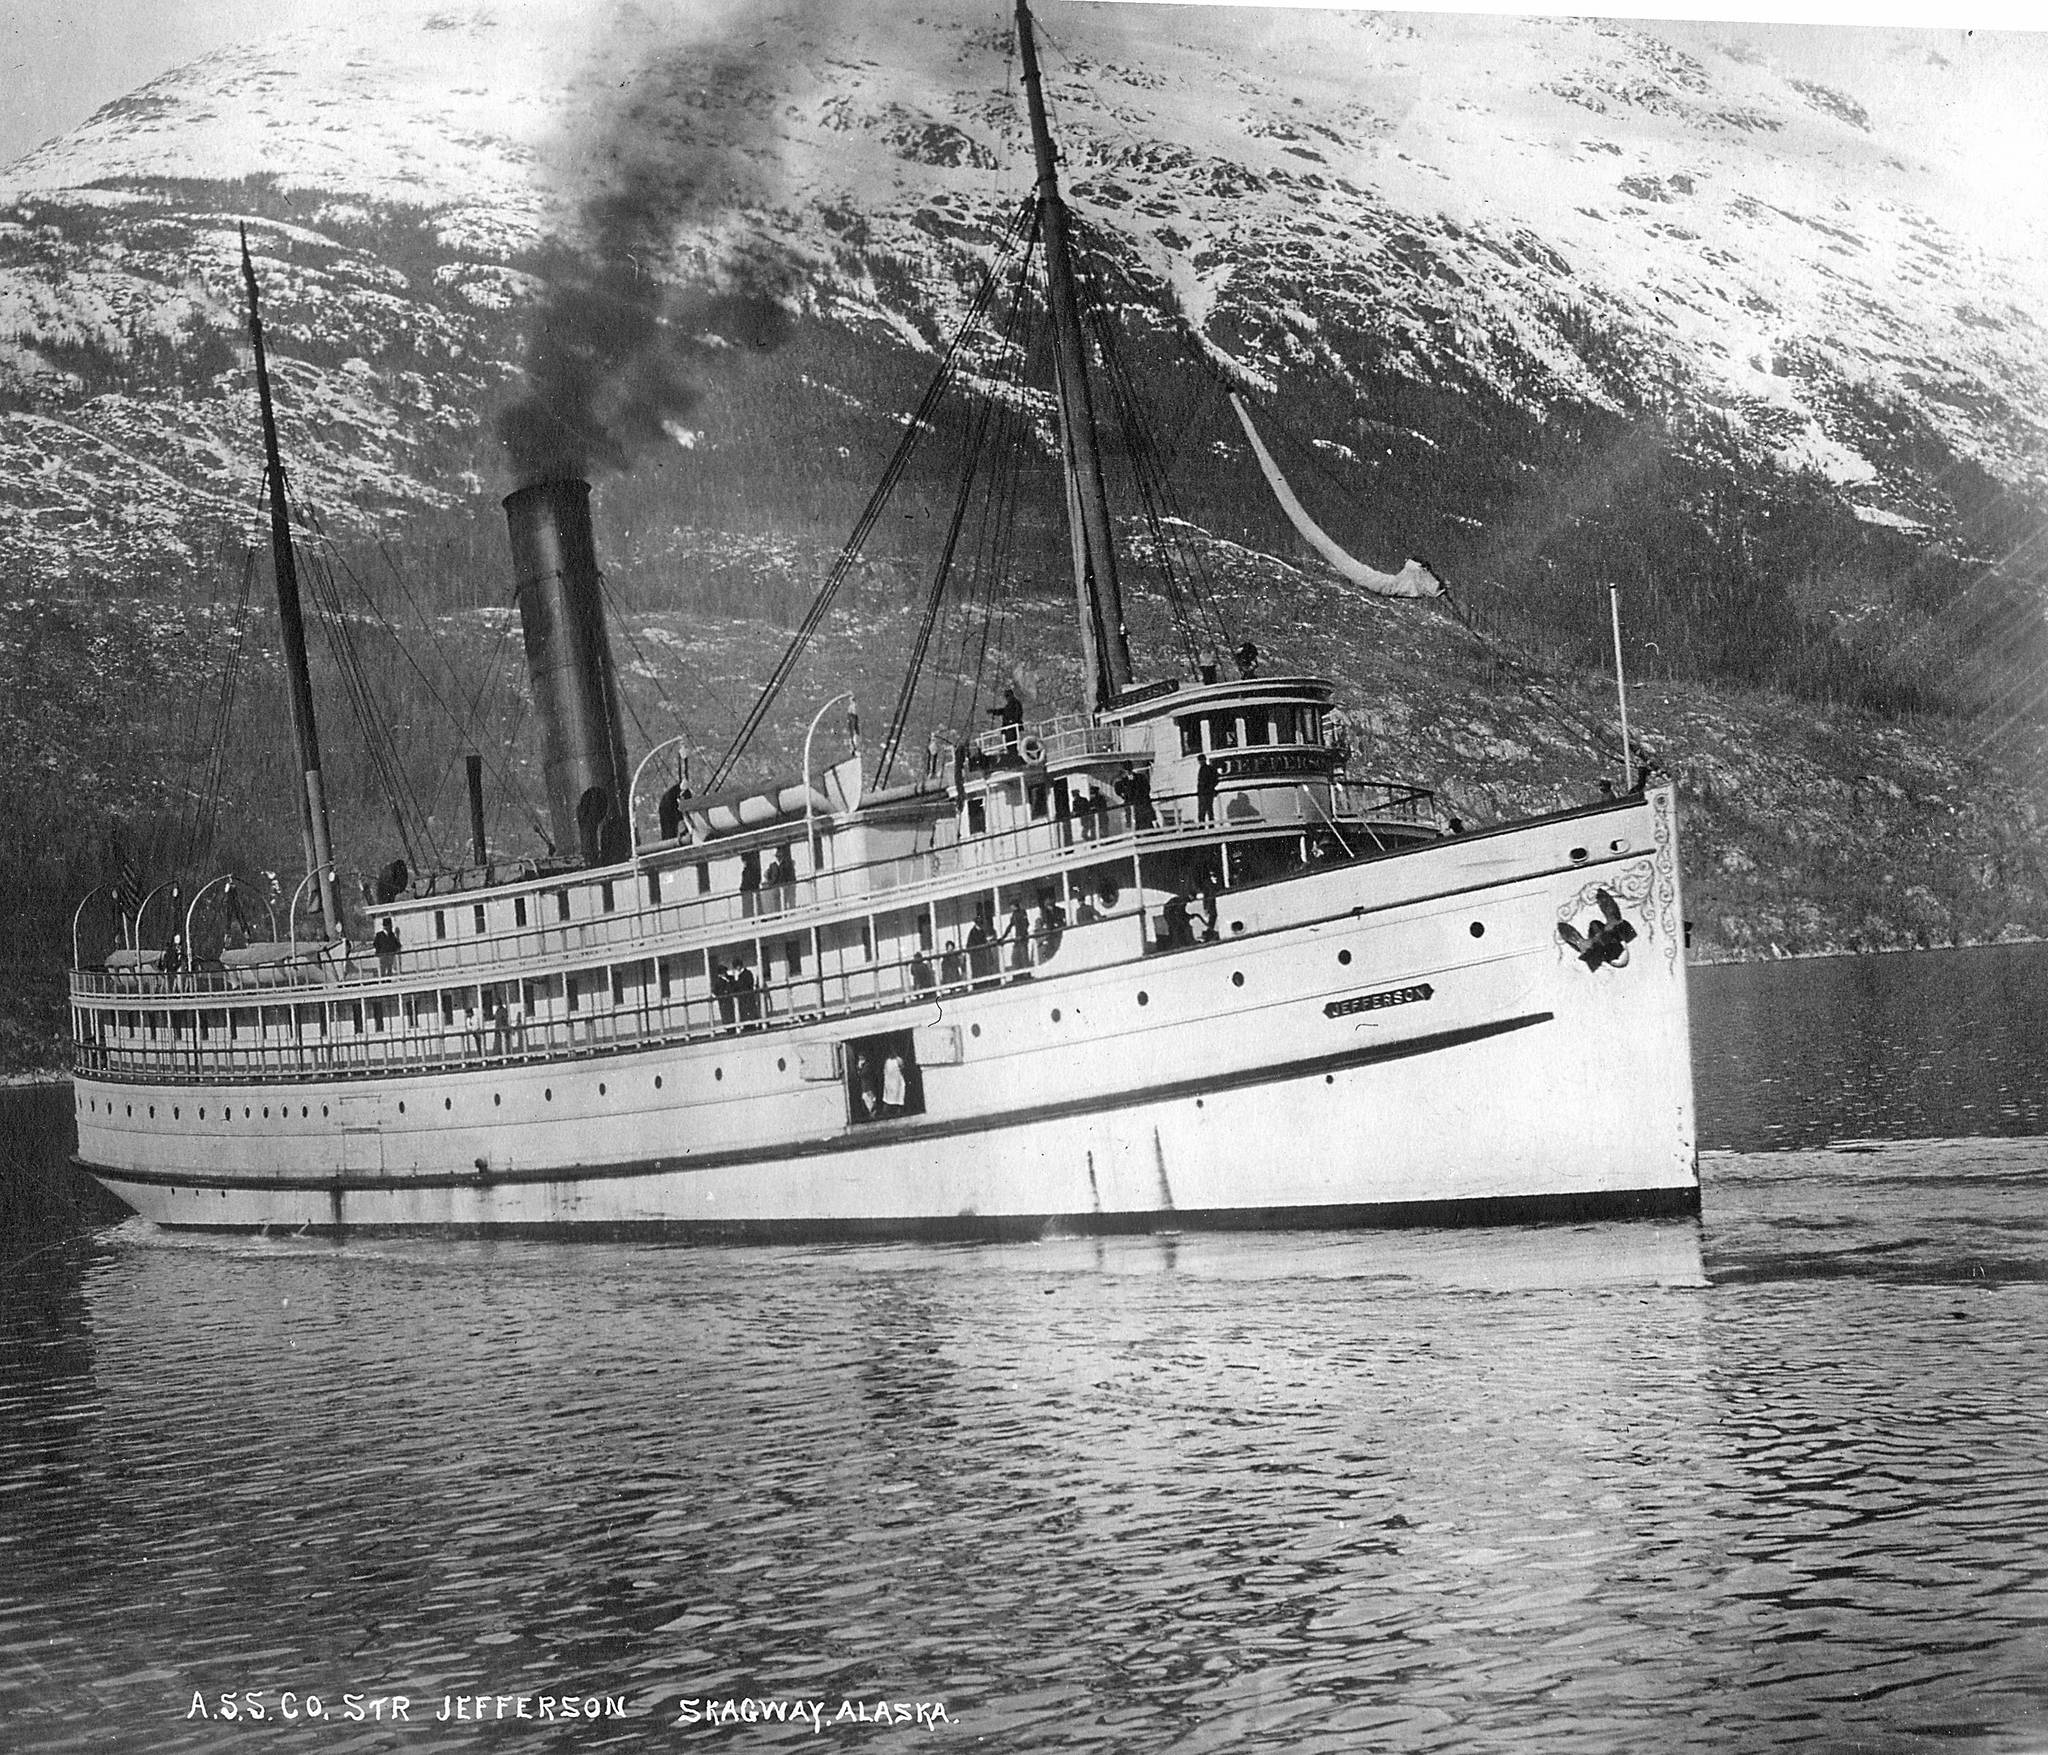 The Alaska Steamship Comany’s S.S. Jefferson coming to dock at the Moore Whalf in Skagway. The steamer was one of many early cruise ships visiting Skagway. Image courtesy of the Klondike Gold Rush National Historical Park, from the Candy Waugaman Collection, KLGO TS-206-8919.